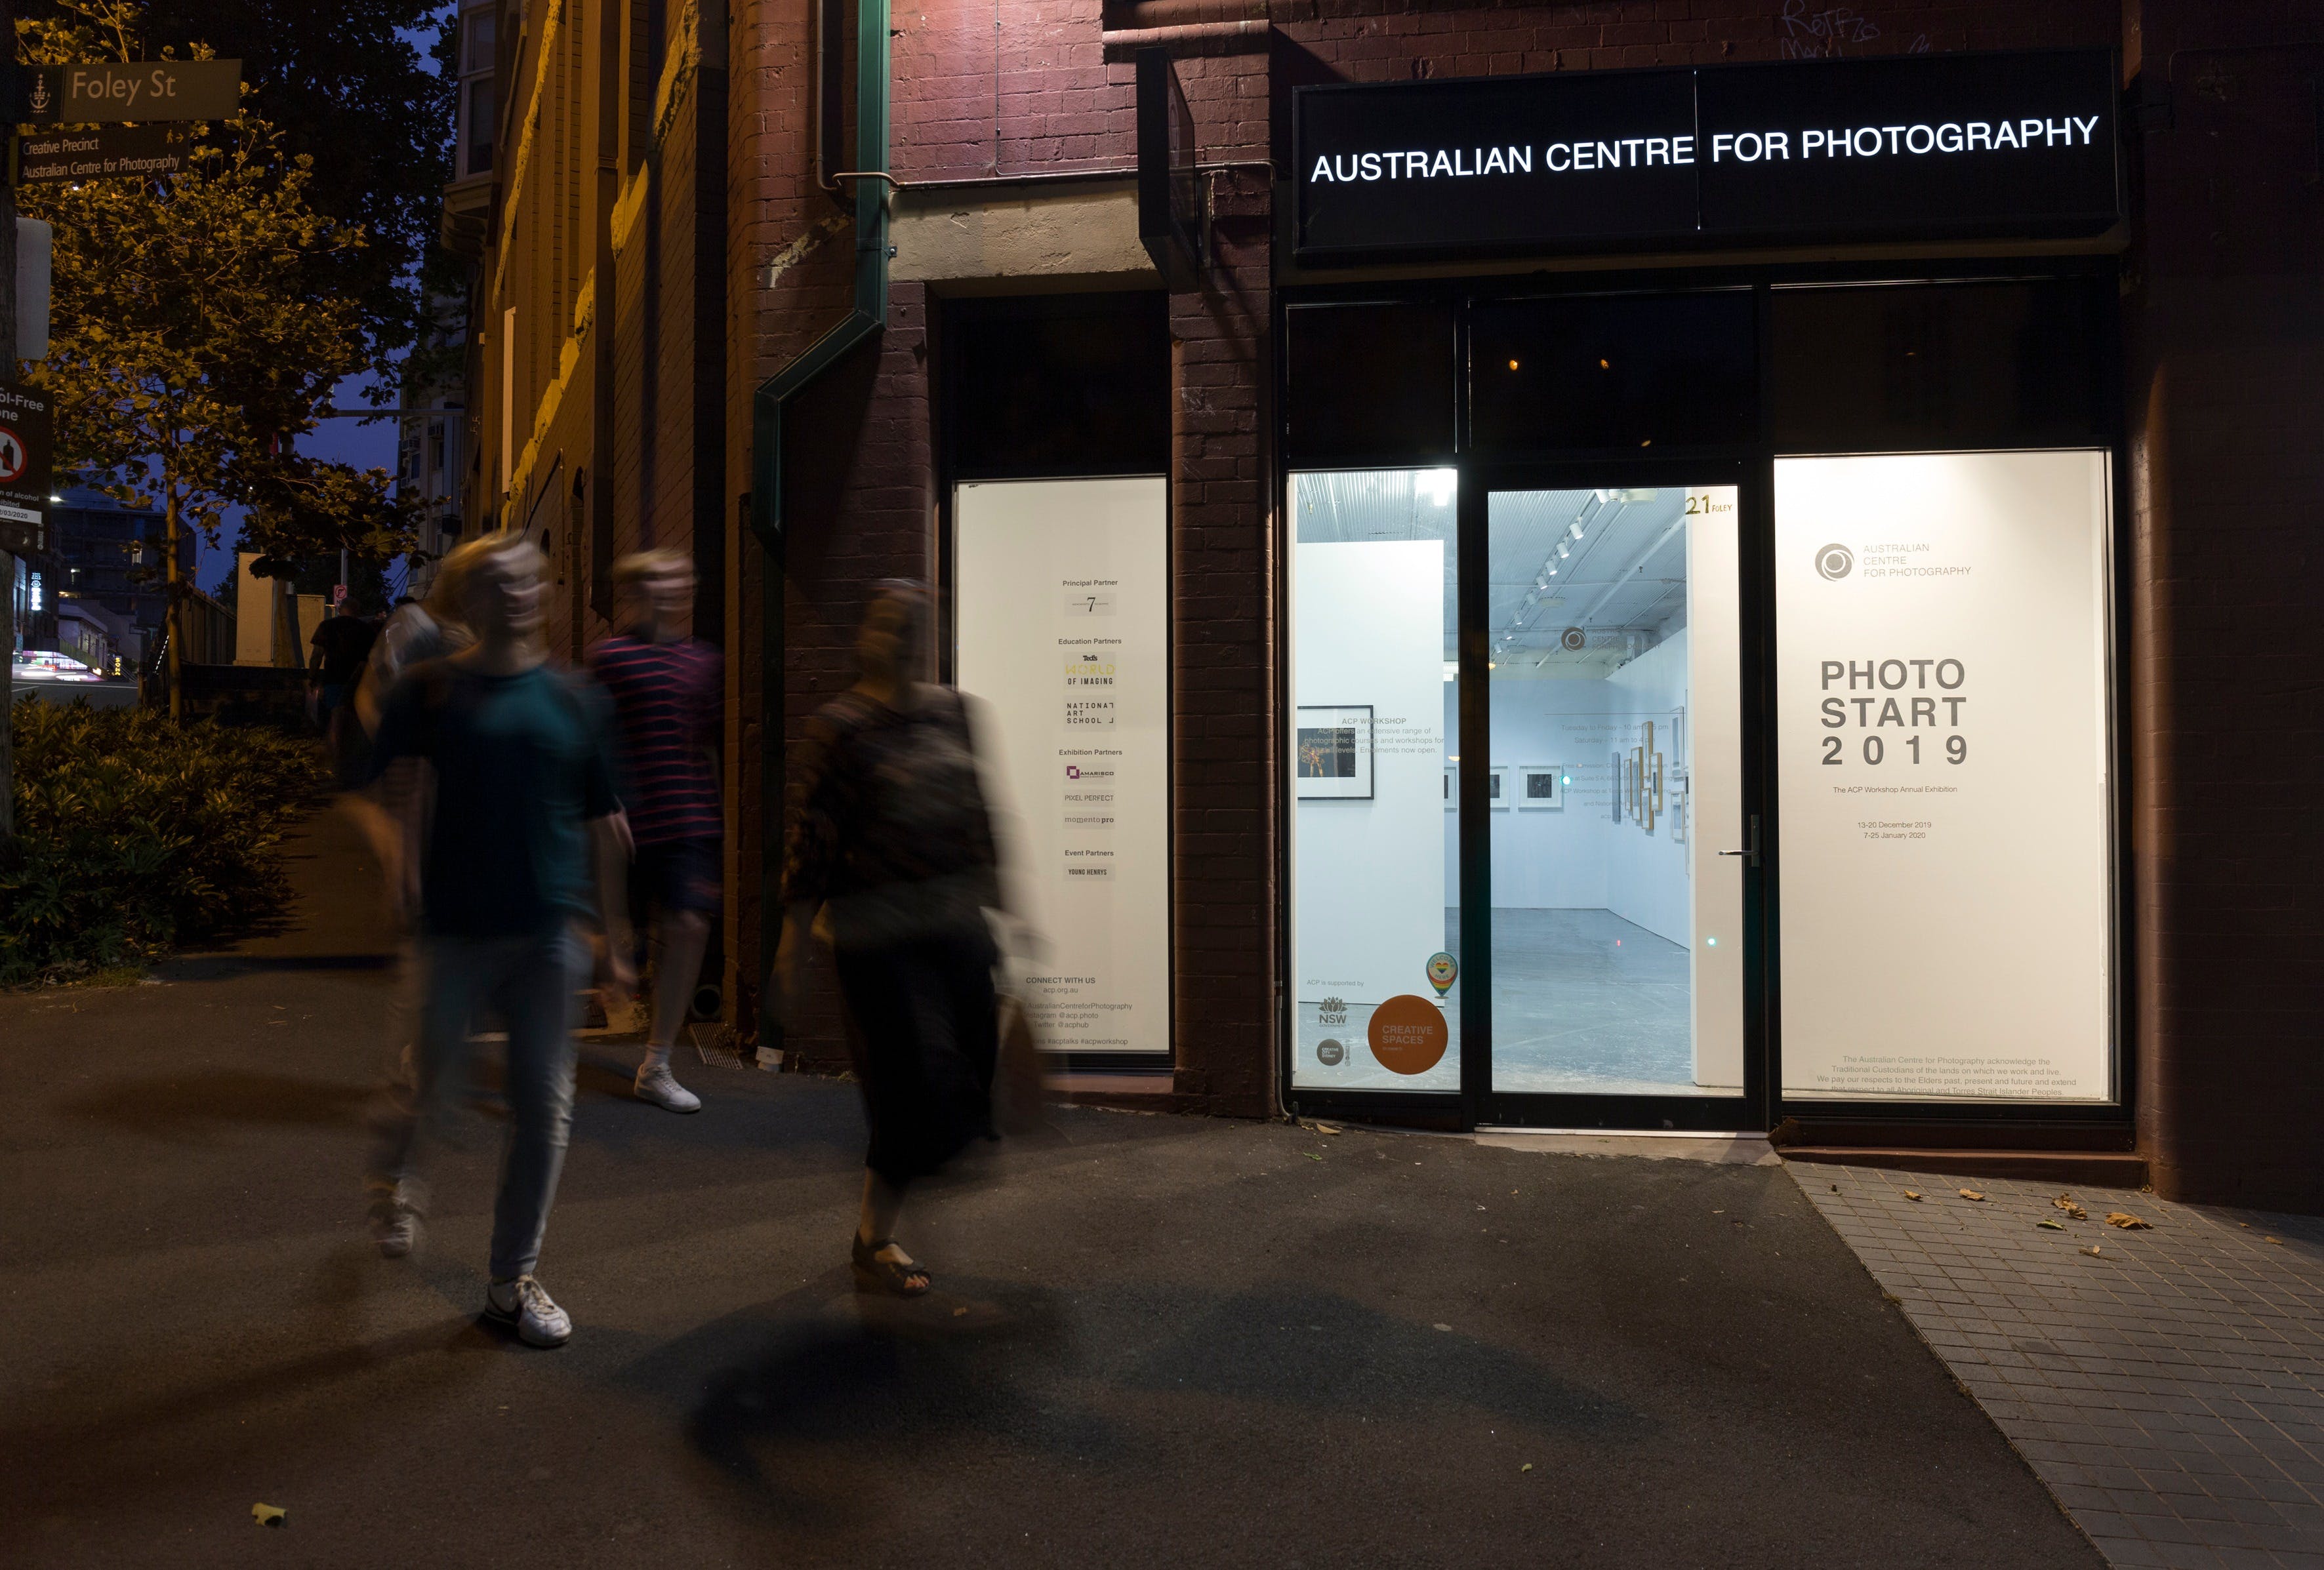 Australian Centre for Photography - Tourism Adelaide